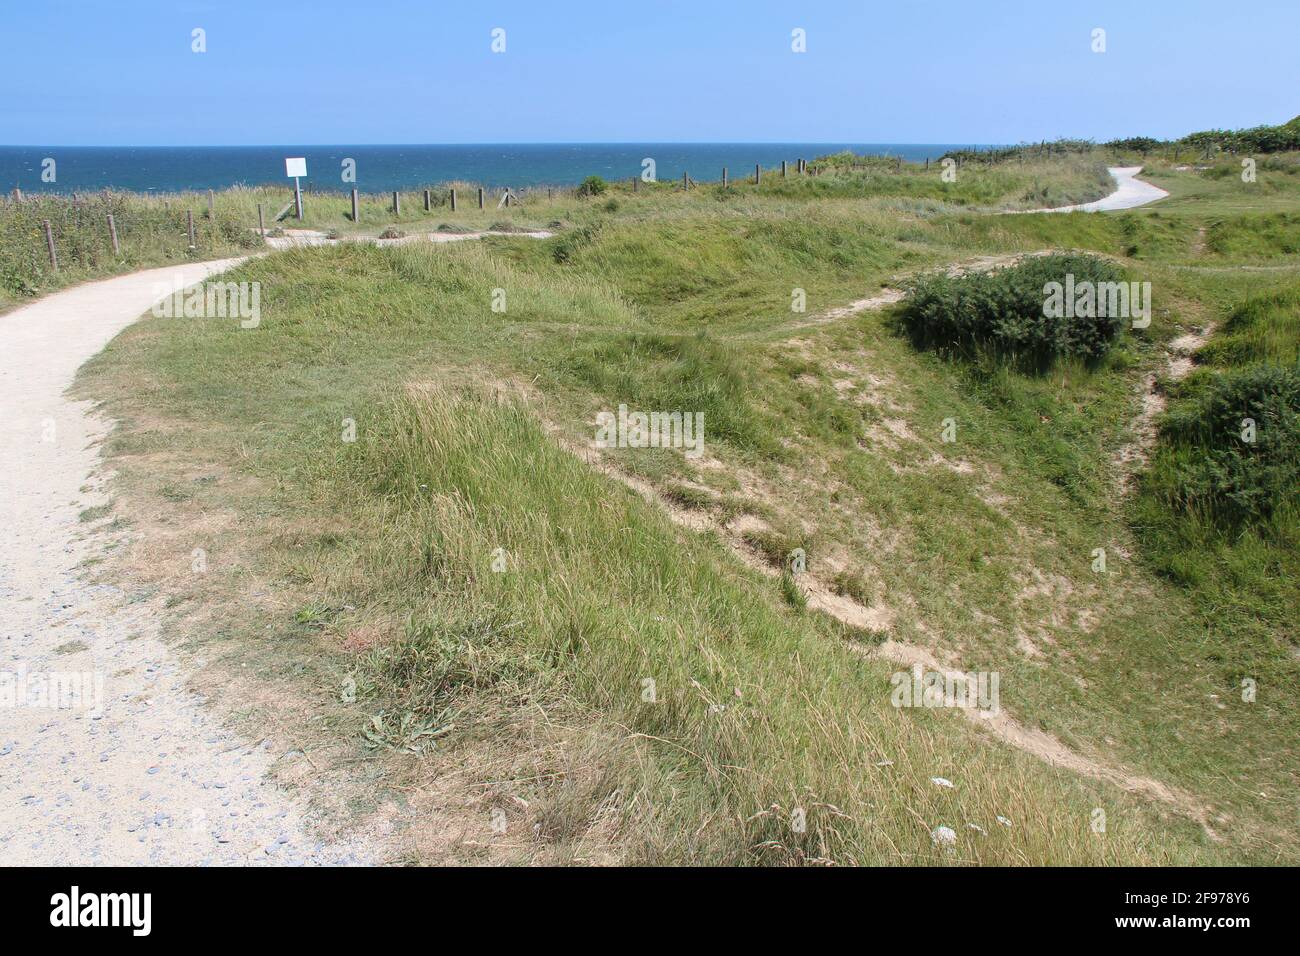 at pointe du hoc in normandy (france) Stock Photo